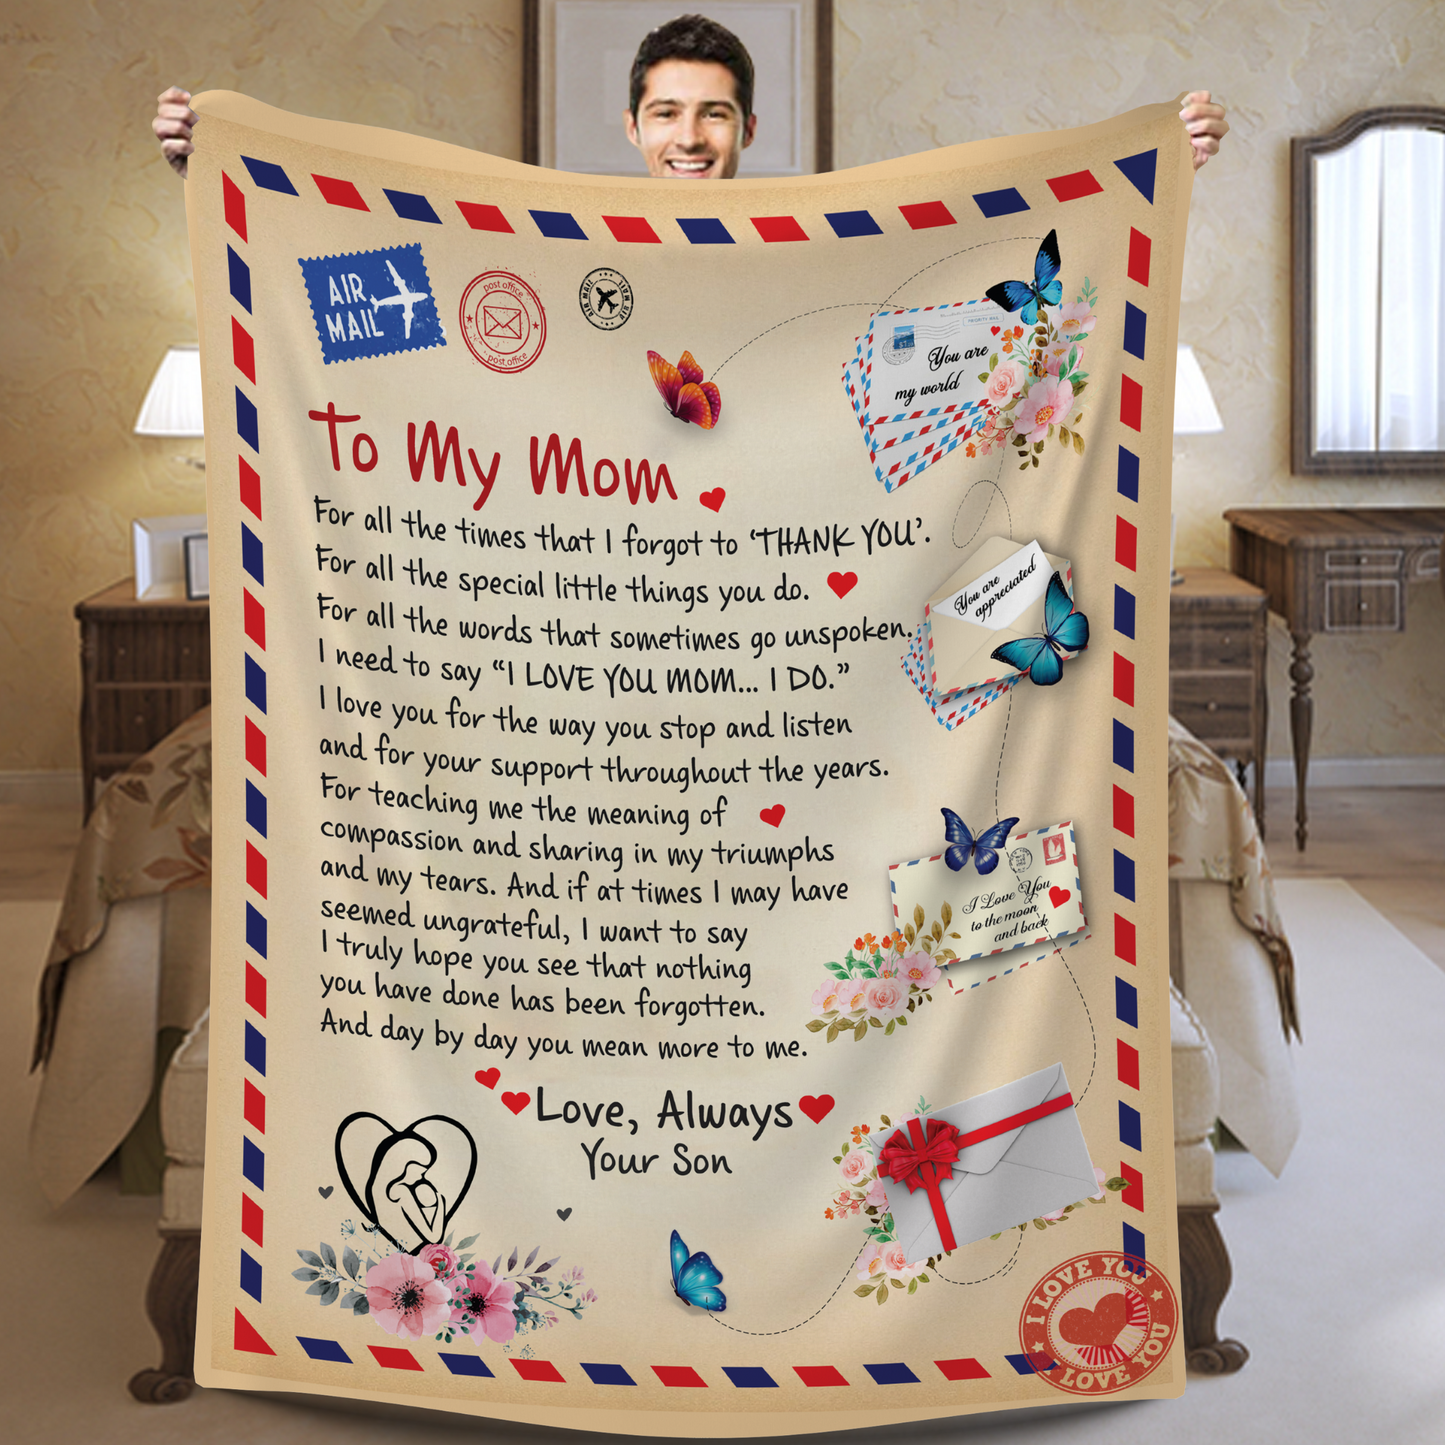 Mom - Giant Post Card Blanket - From Son cc1